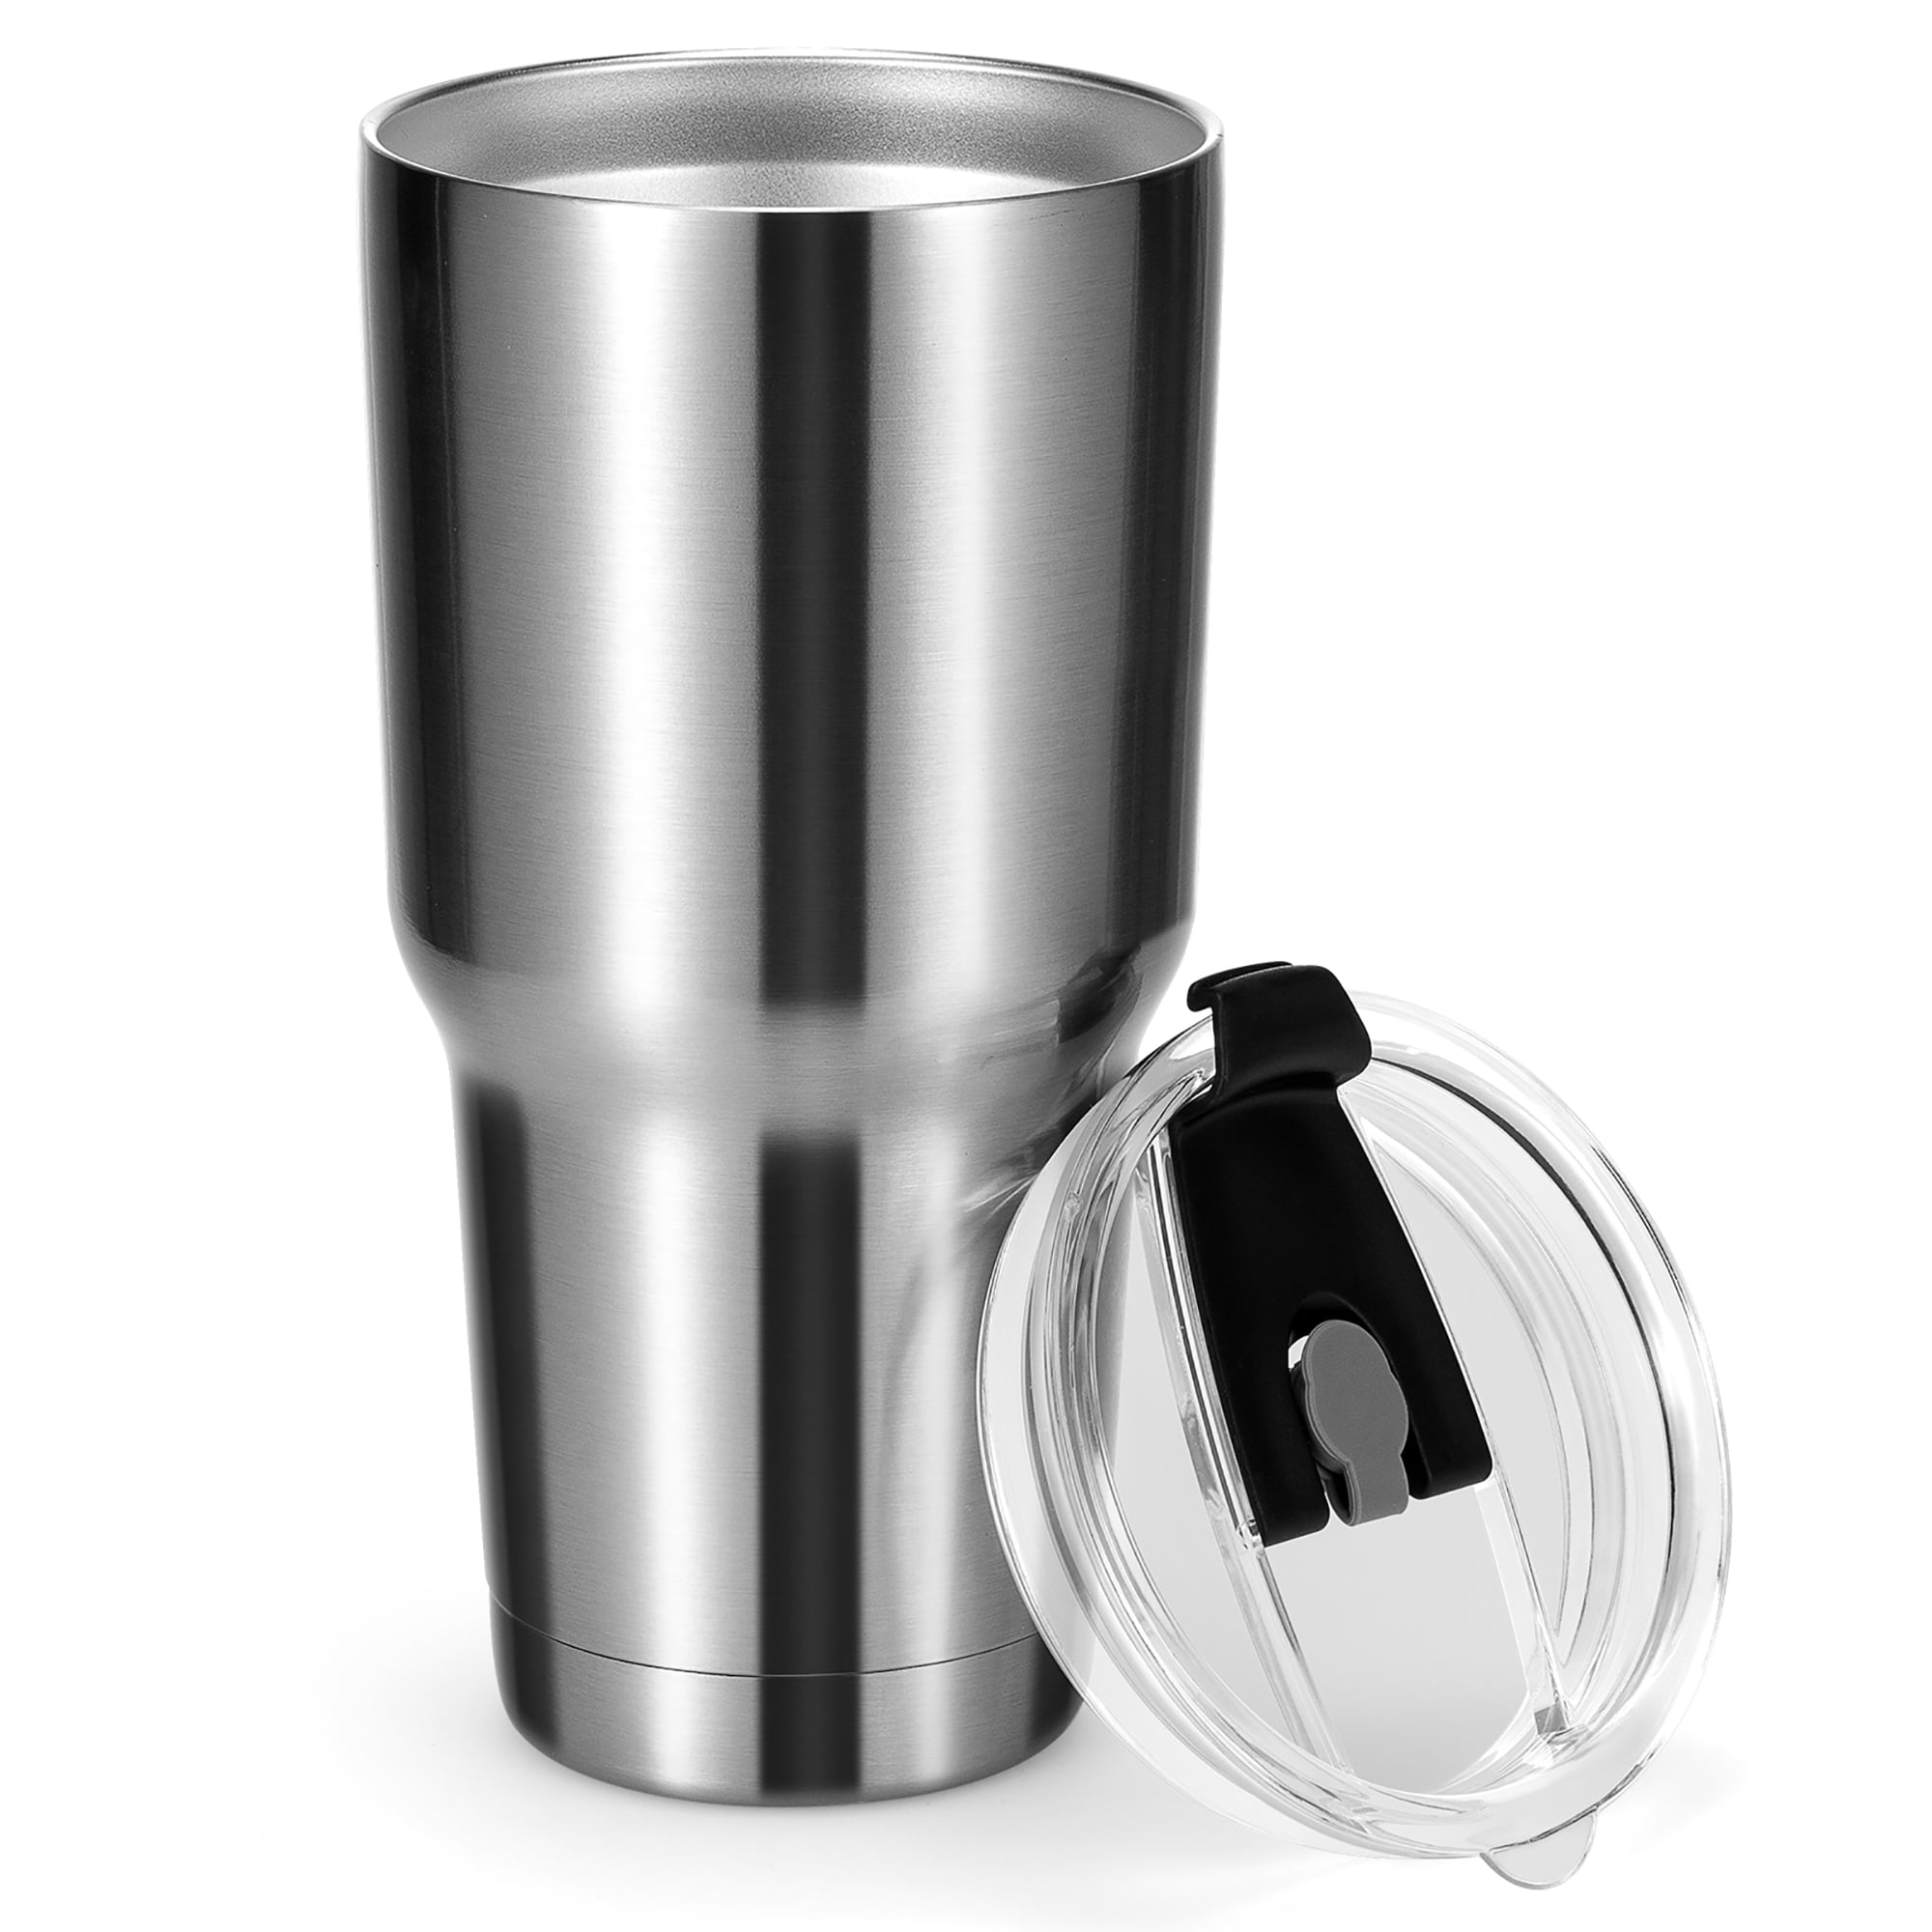 Travelwant 350/500ml Stainless Steel Cups,Insulated Metal Cups Double Wall Vacuum Tumbler Drinking Cups Steel Cups Drinking for BBQ Home Office Party